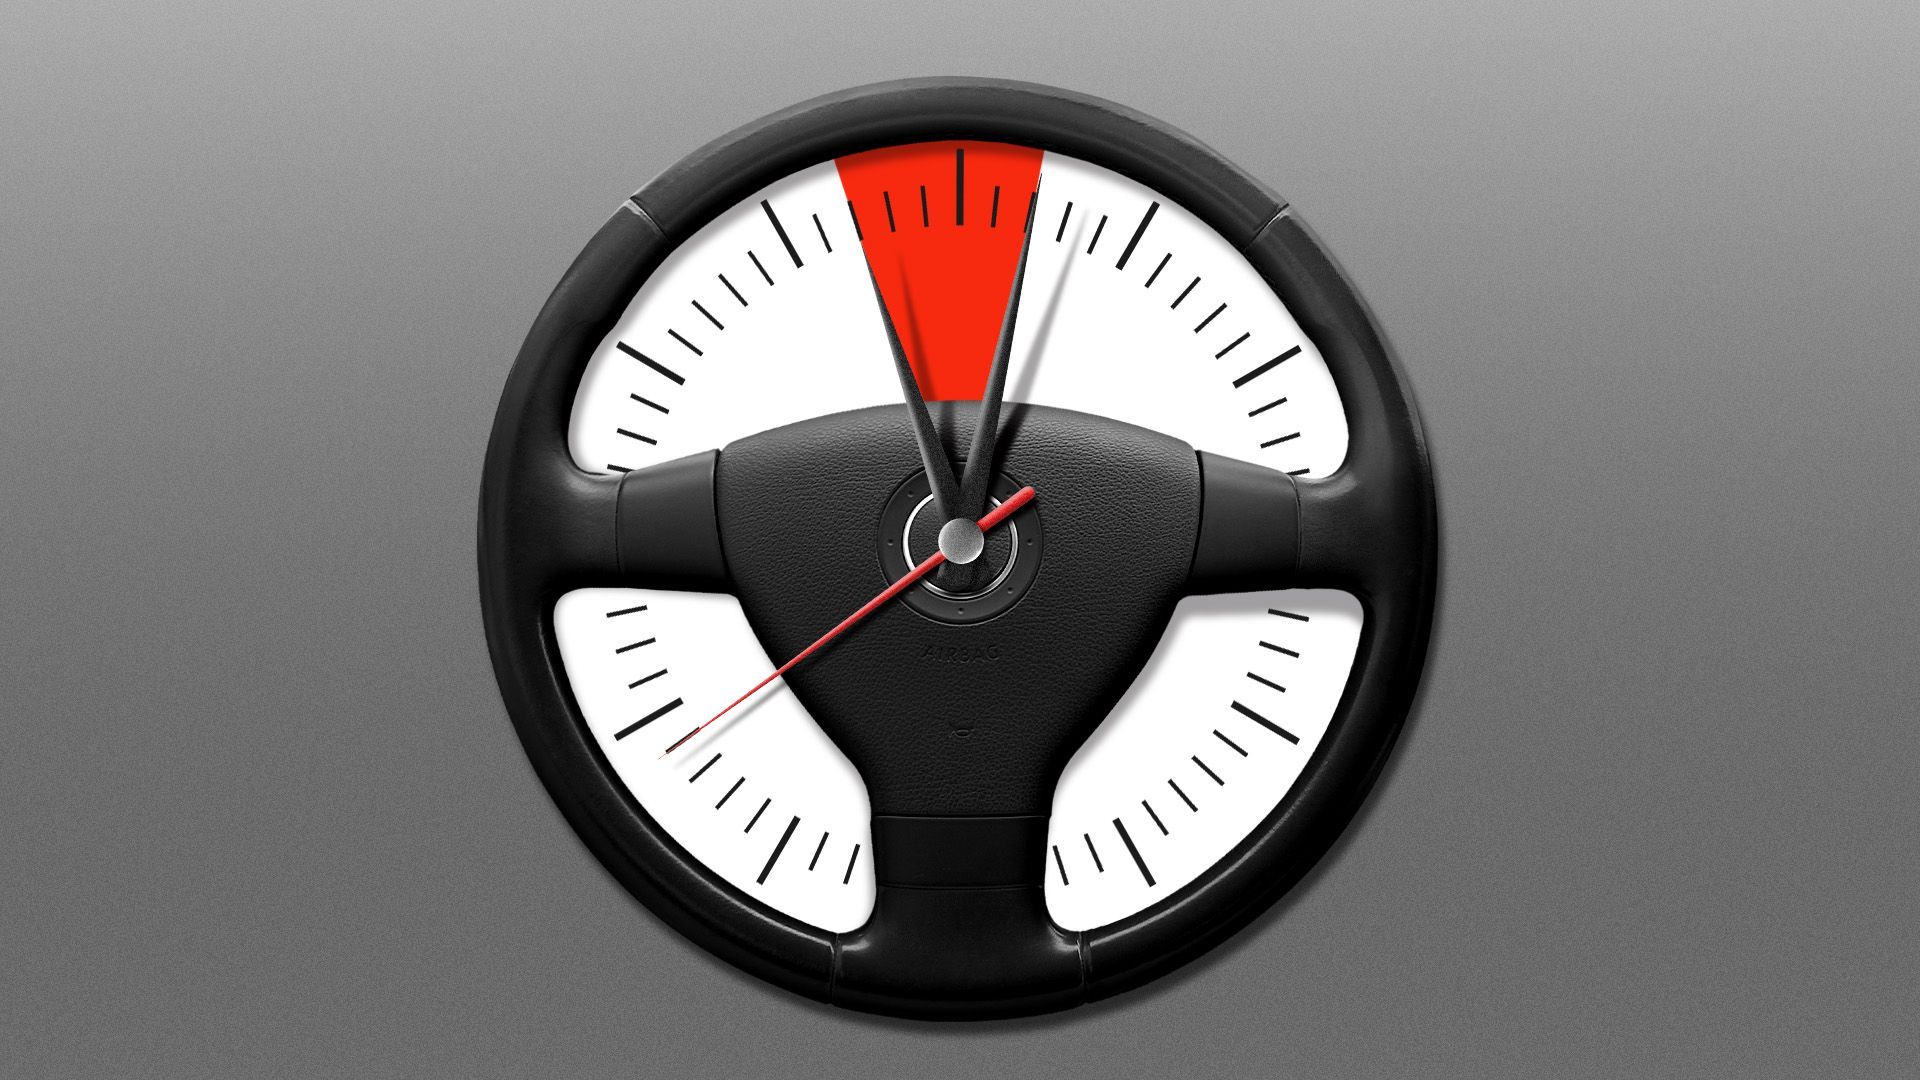 Illustration of a steering wheel as a clock with a highlighted portion in red